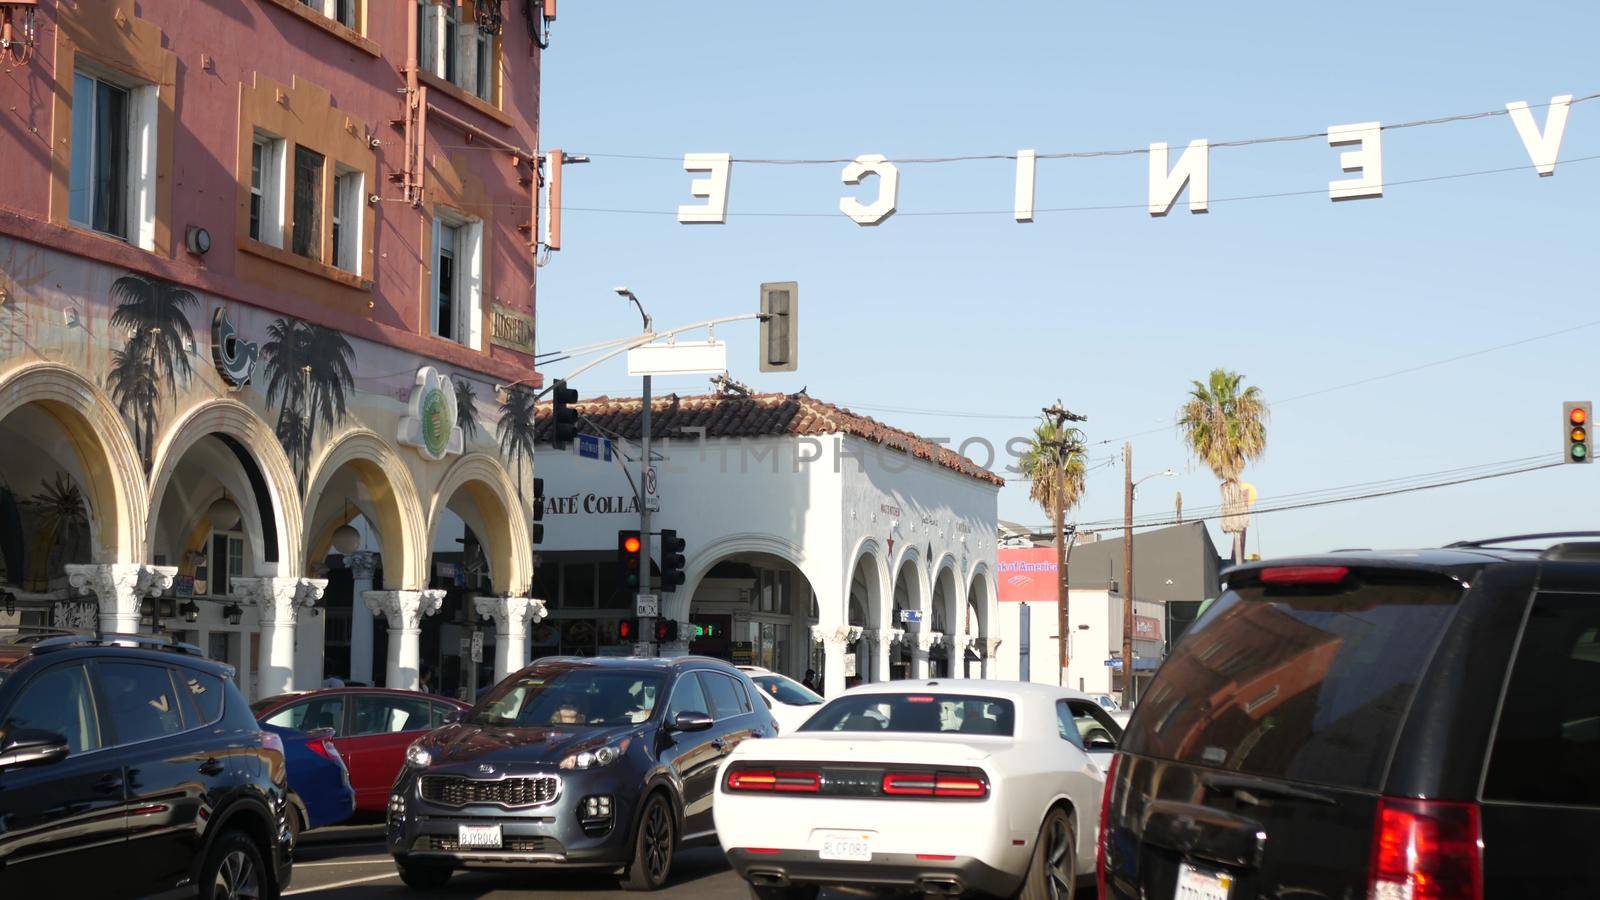 LOS ANGELES CA USA - 16 NOV 2019: California summertime Venice beach aesthetic. Iconic retro sign hanging on street. Famous symbol and travel destination. Letters over the road with cars and people.